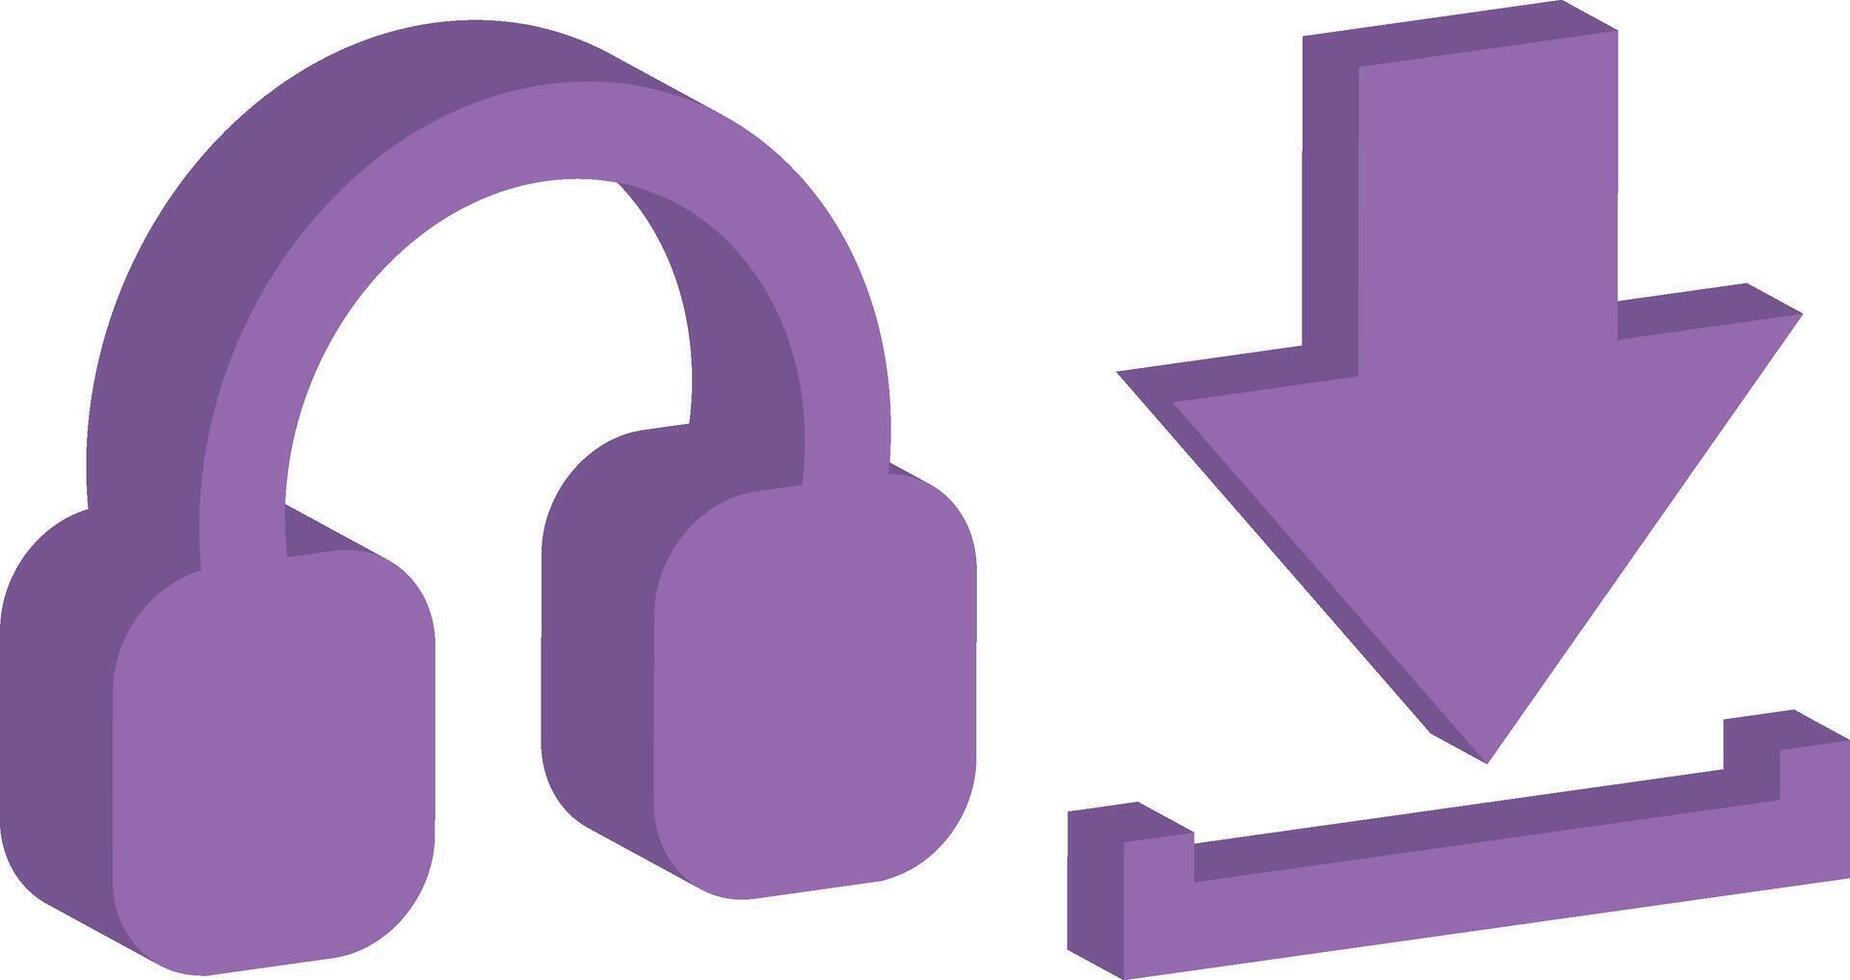 headphone icon and download icon, in purple tones, 3d vector, button vector